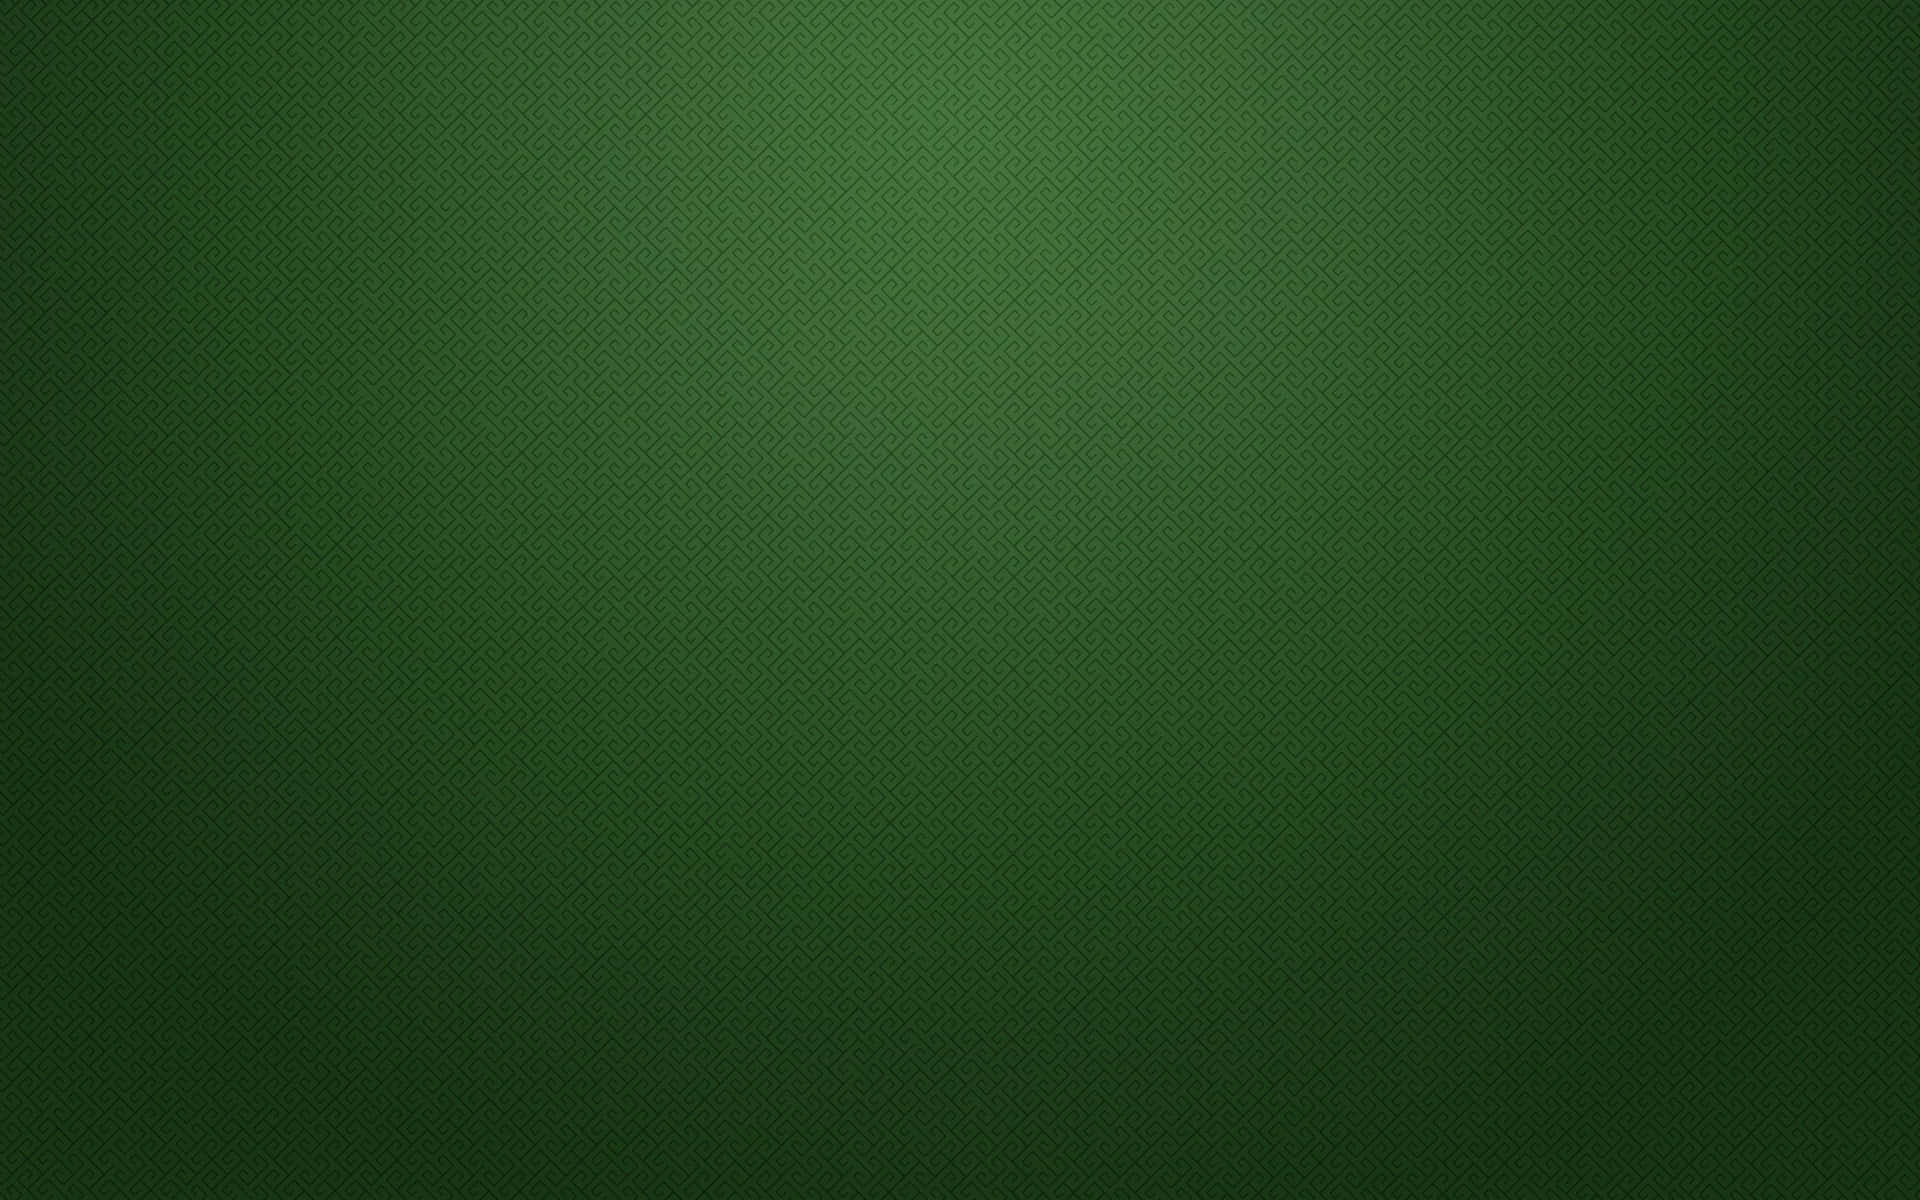 green background with a light background